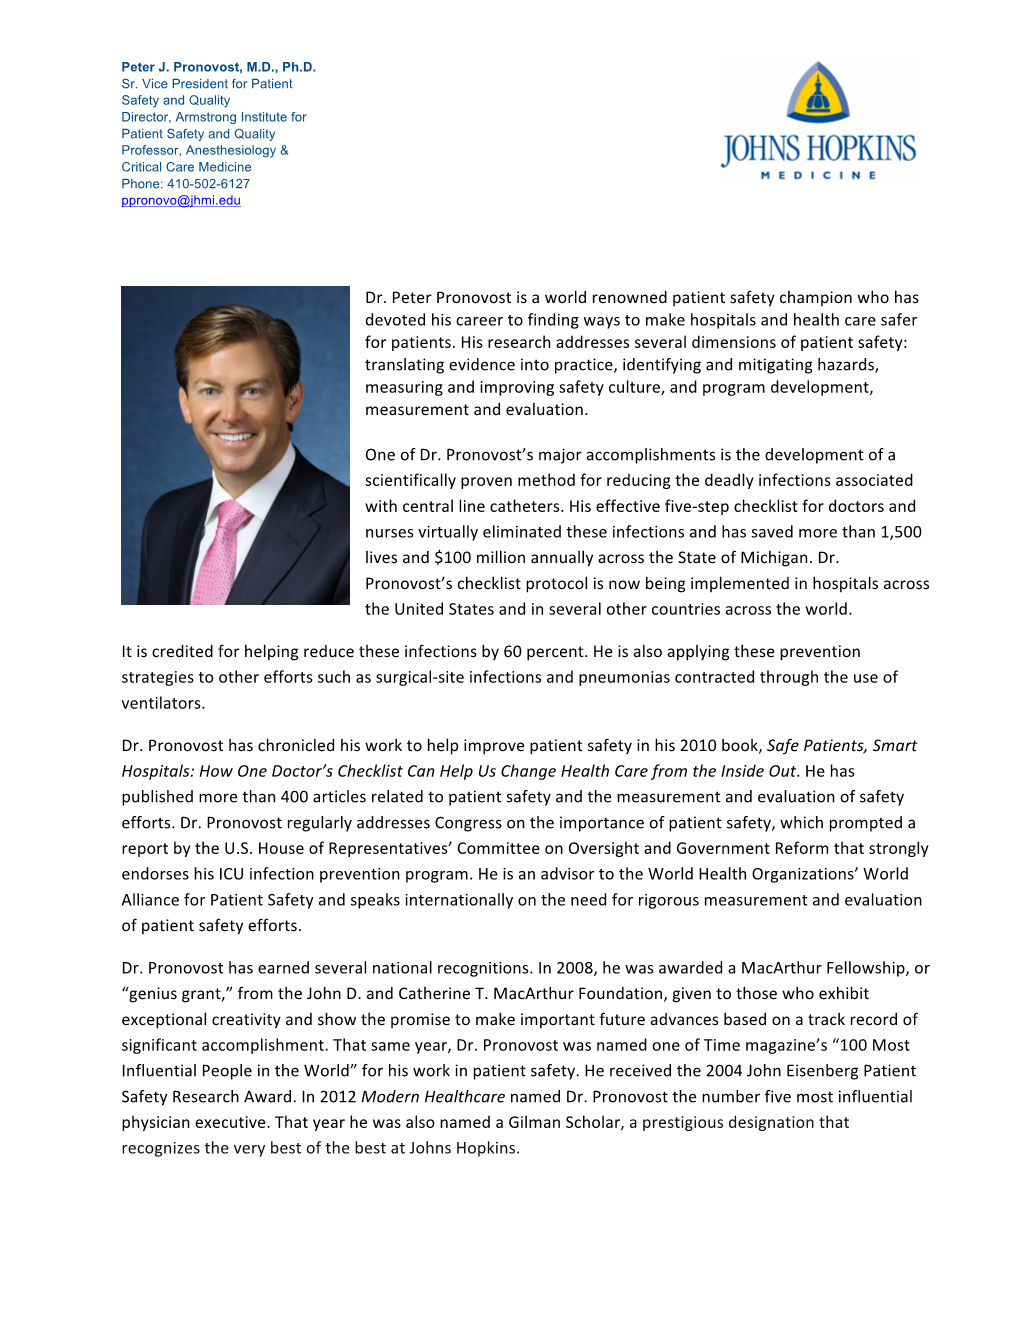 Dr. Peter Pronovost Is a World Renowned Patient Safety Champion Who Has Devoted His Career to Finding Ways to Make Hospitals and Health Care Safer for Patients